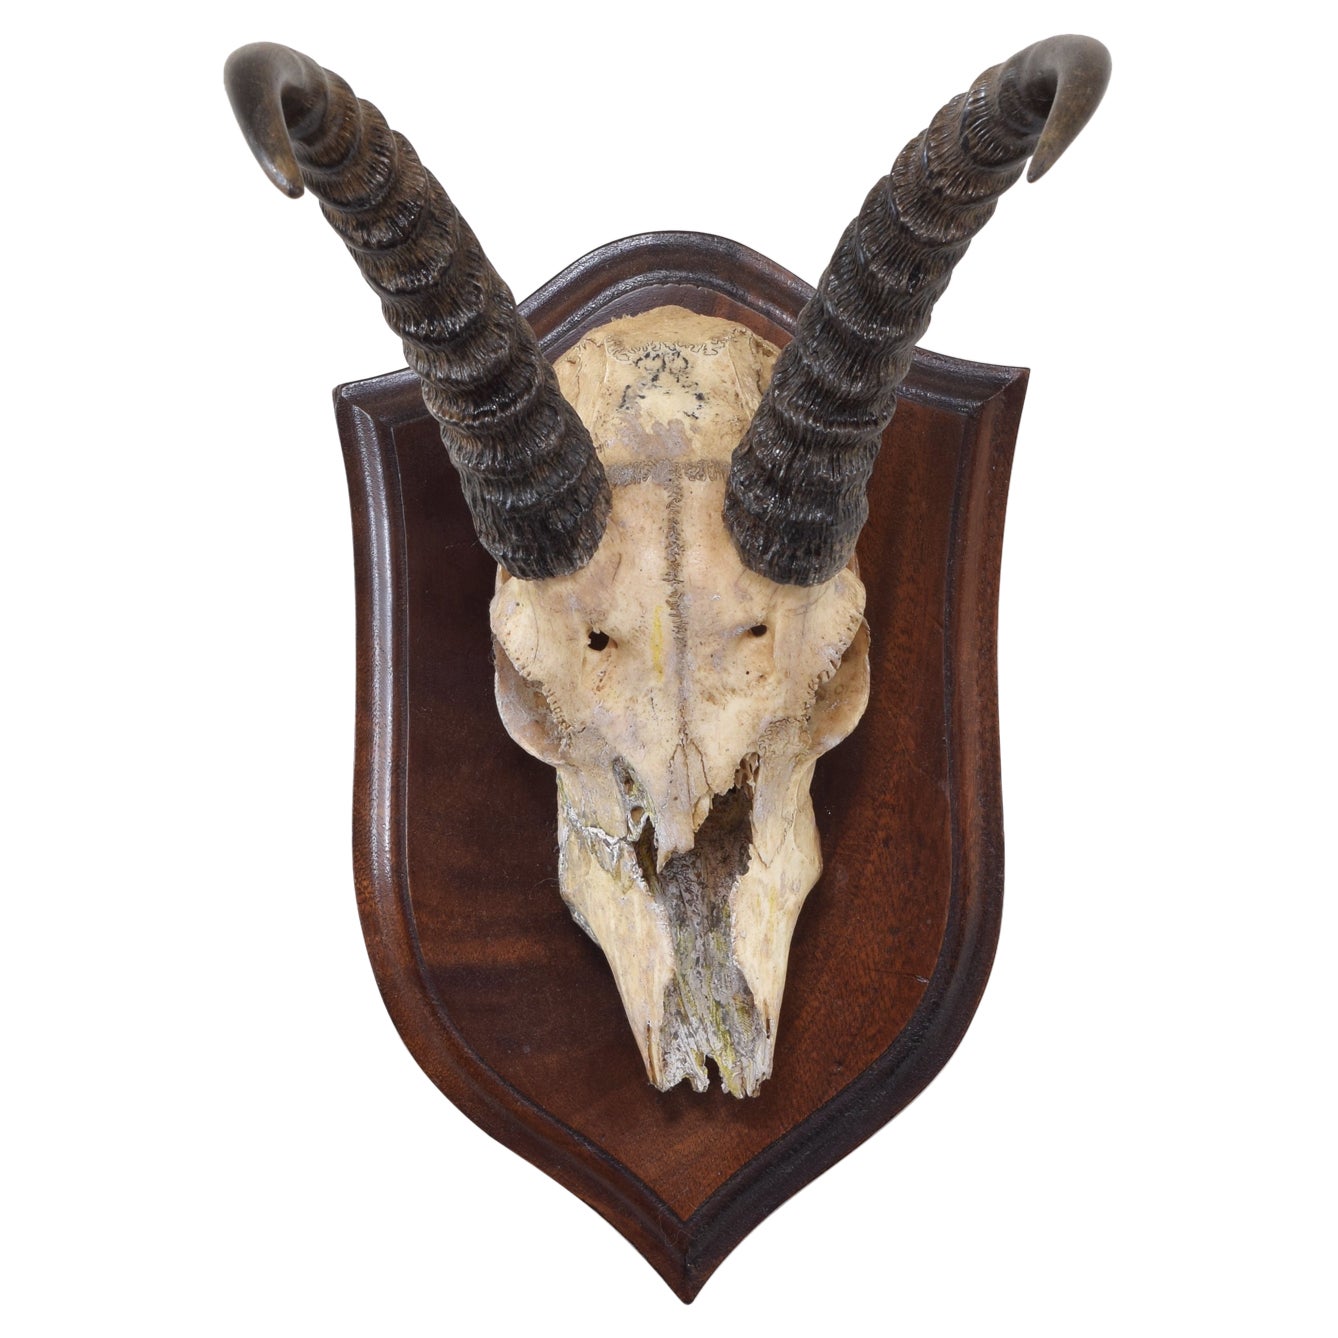 African Springbok Mount, Early 20th Century